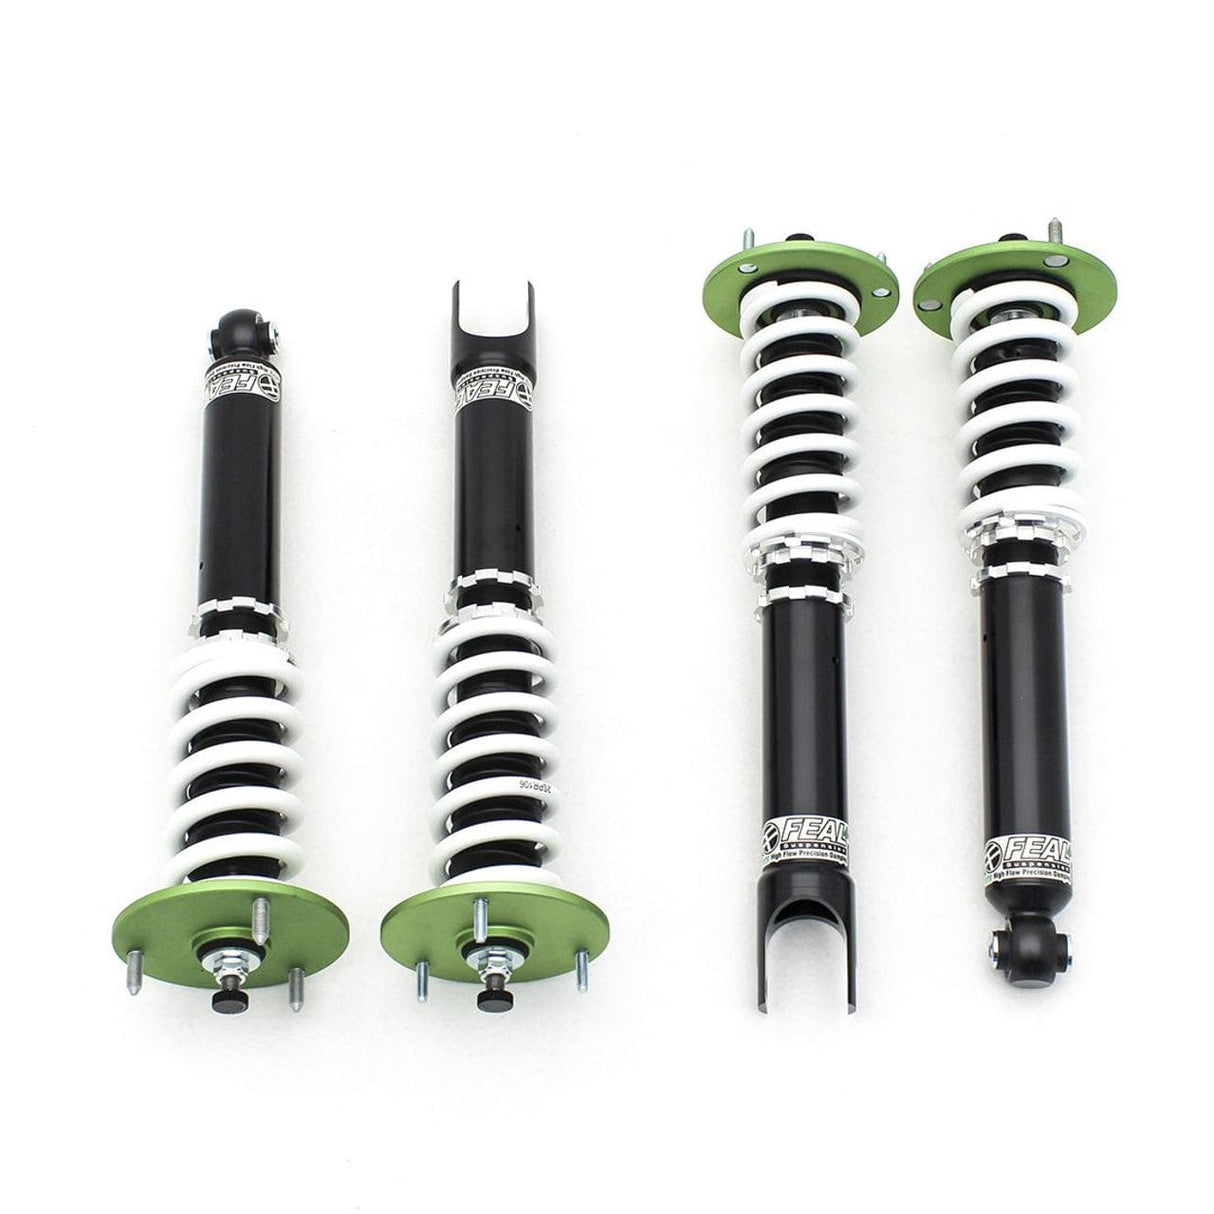 Feal 441 Coilovers - 1983-1987 Toyota Corolla AE86